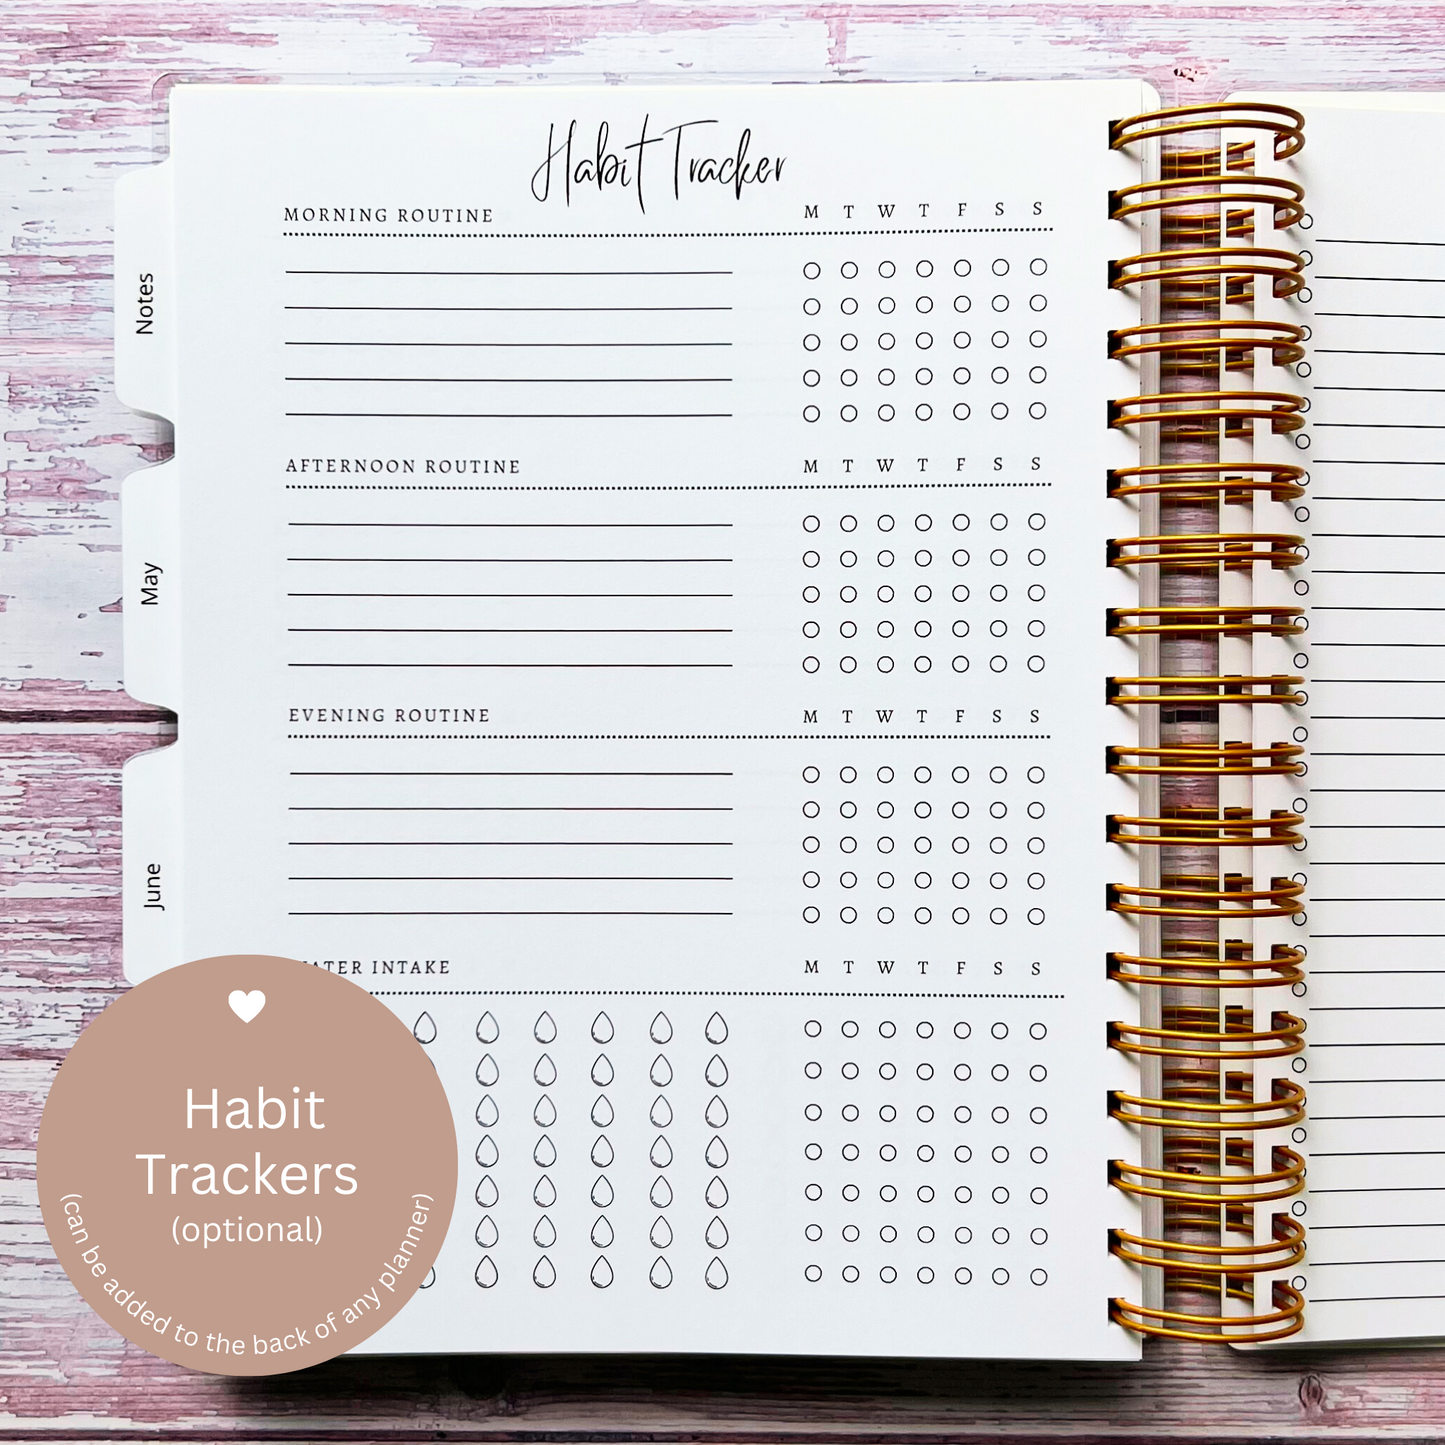 Personalized Weekly Planner | Harvest Moon